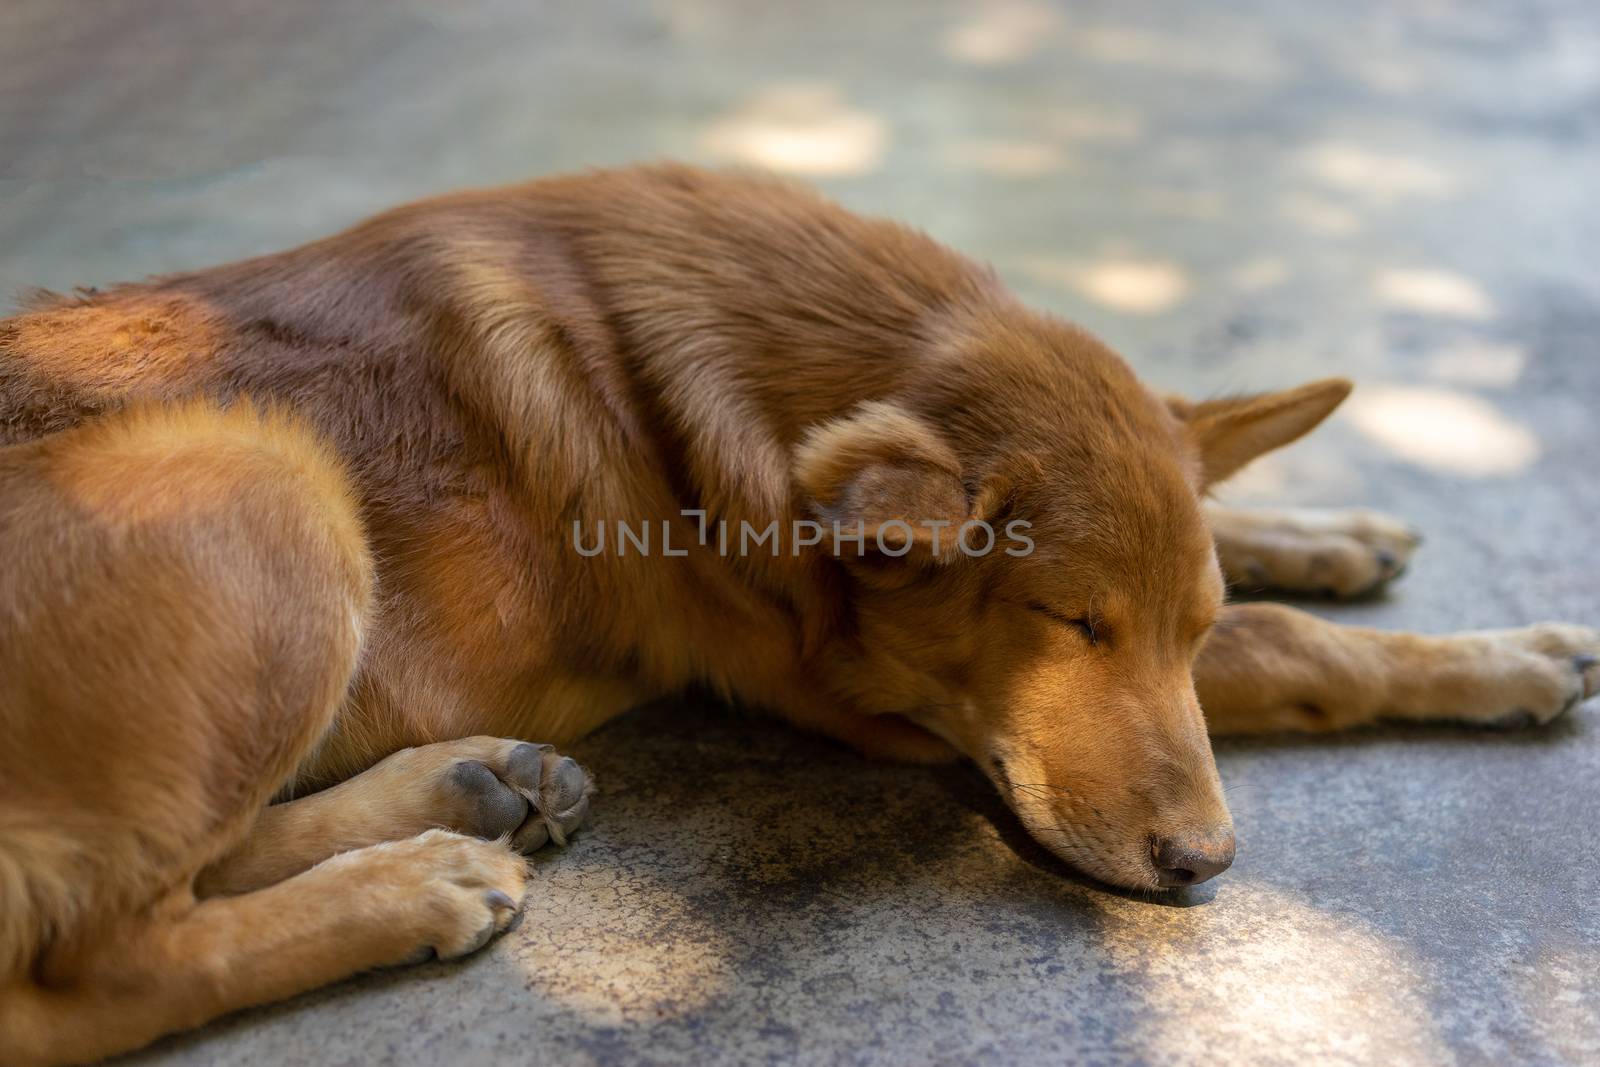 Dog is sleeping on the ground by domonite